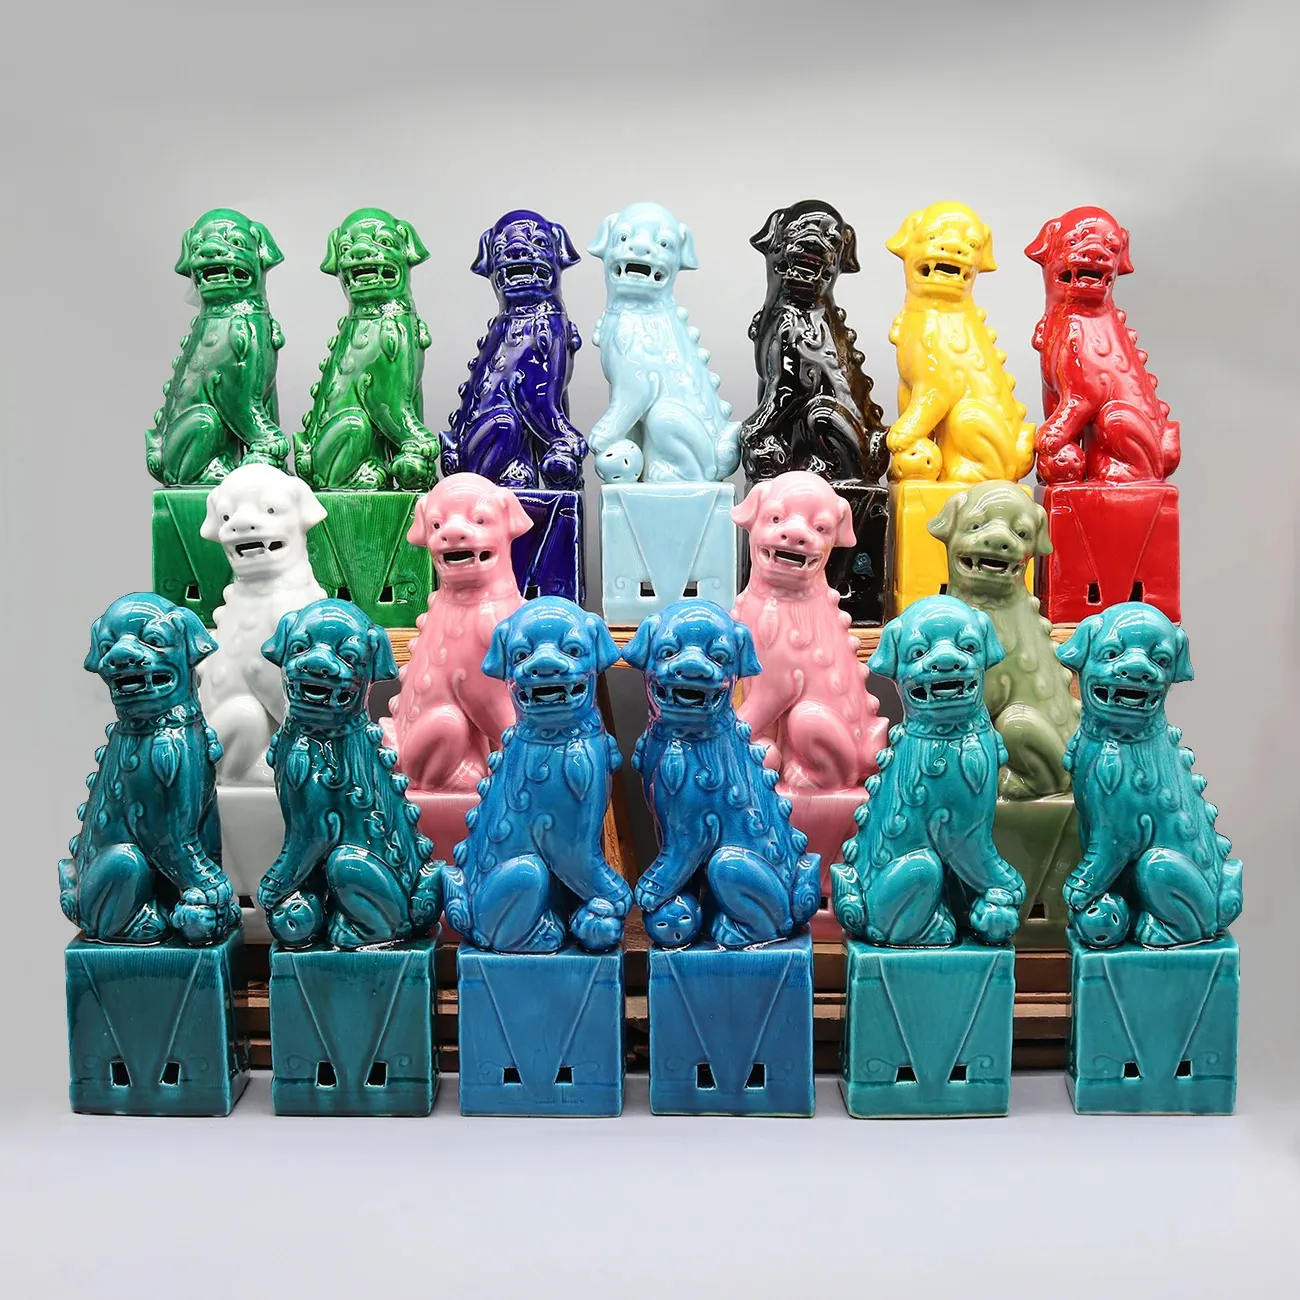 Foo Dogs Fu Dogs Buddher Dogs Chinese Guardian Lions Ceramic Sc​​ulpture Home Decoration 240202のペア